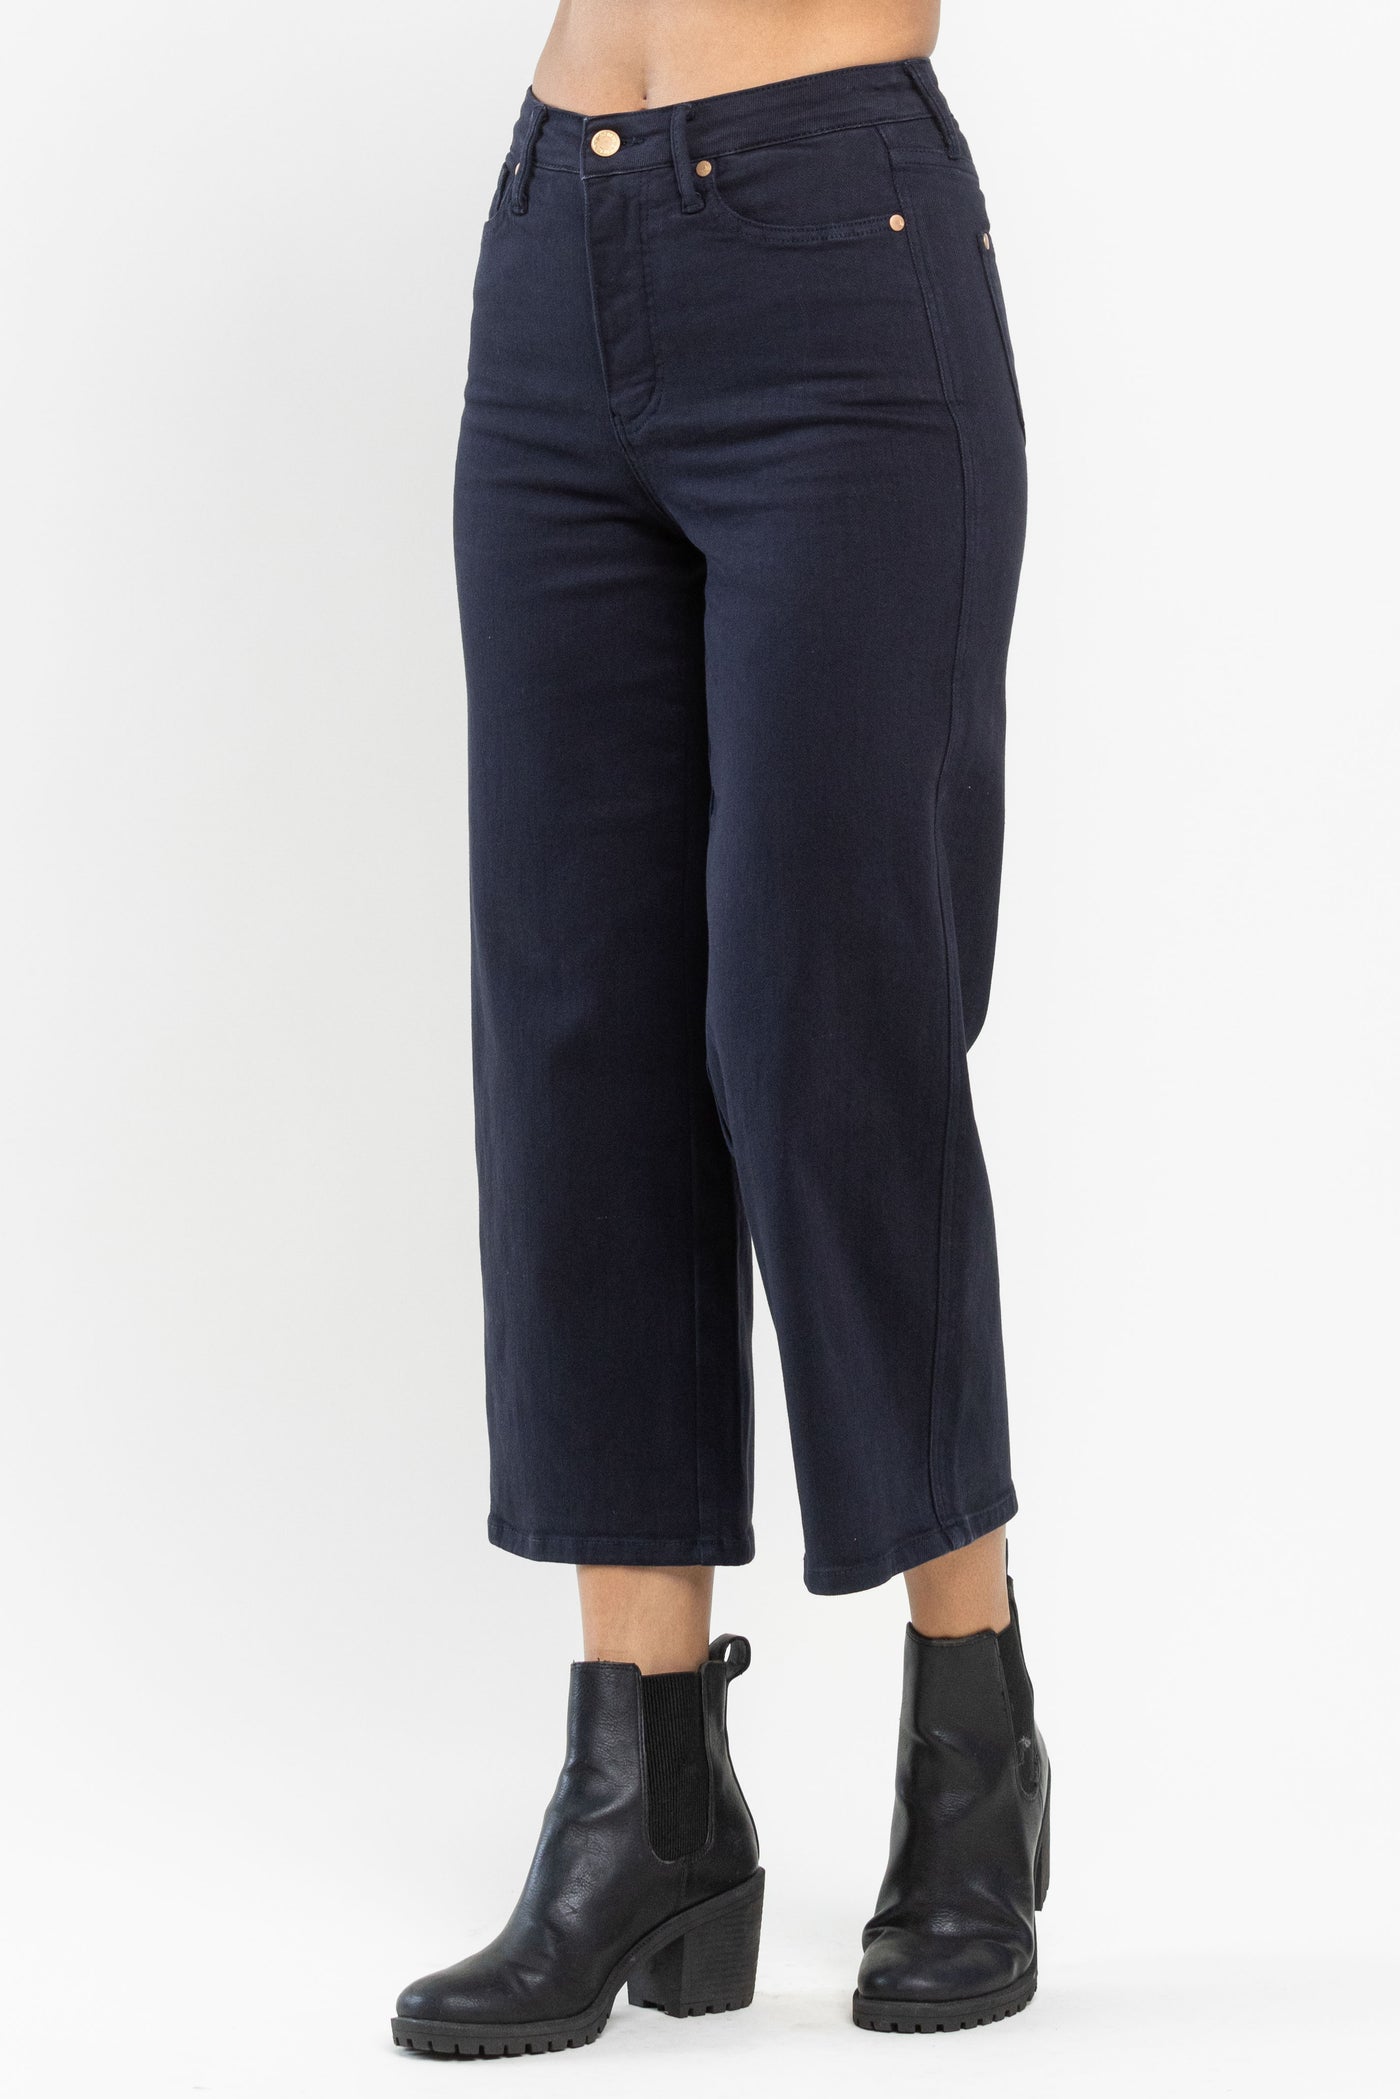 Judy Blue | High Rise Navy Garment Dyed Cropped Wide Leg Jeans w/ Tummy Control